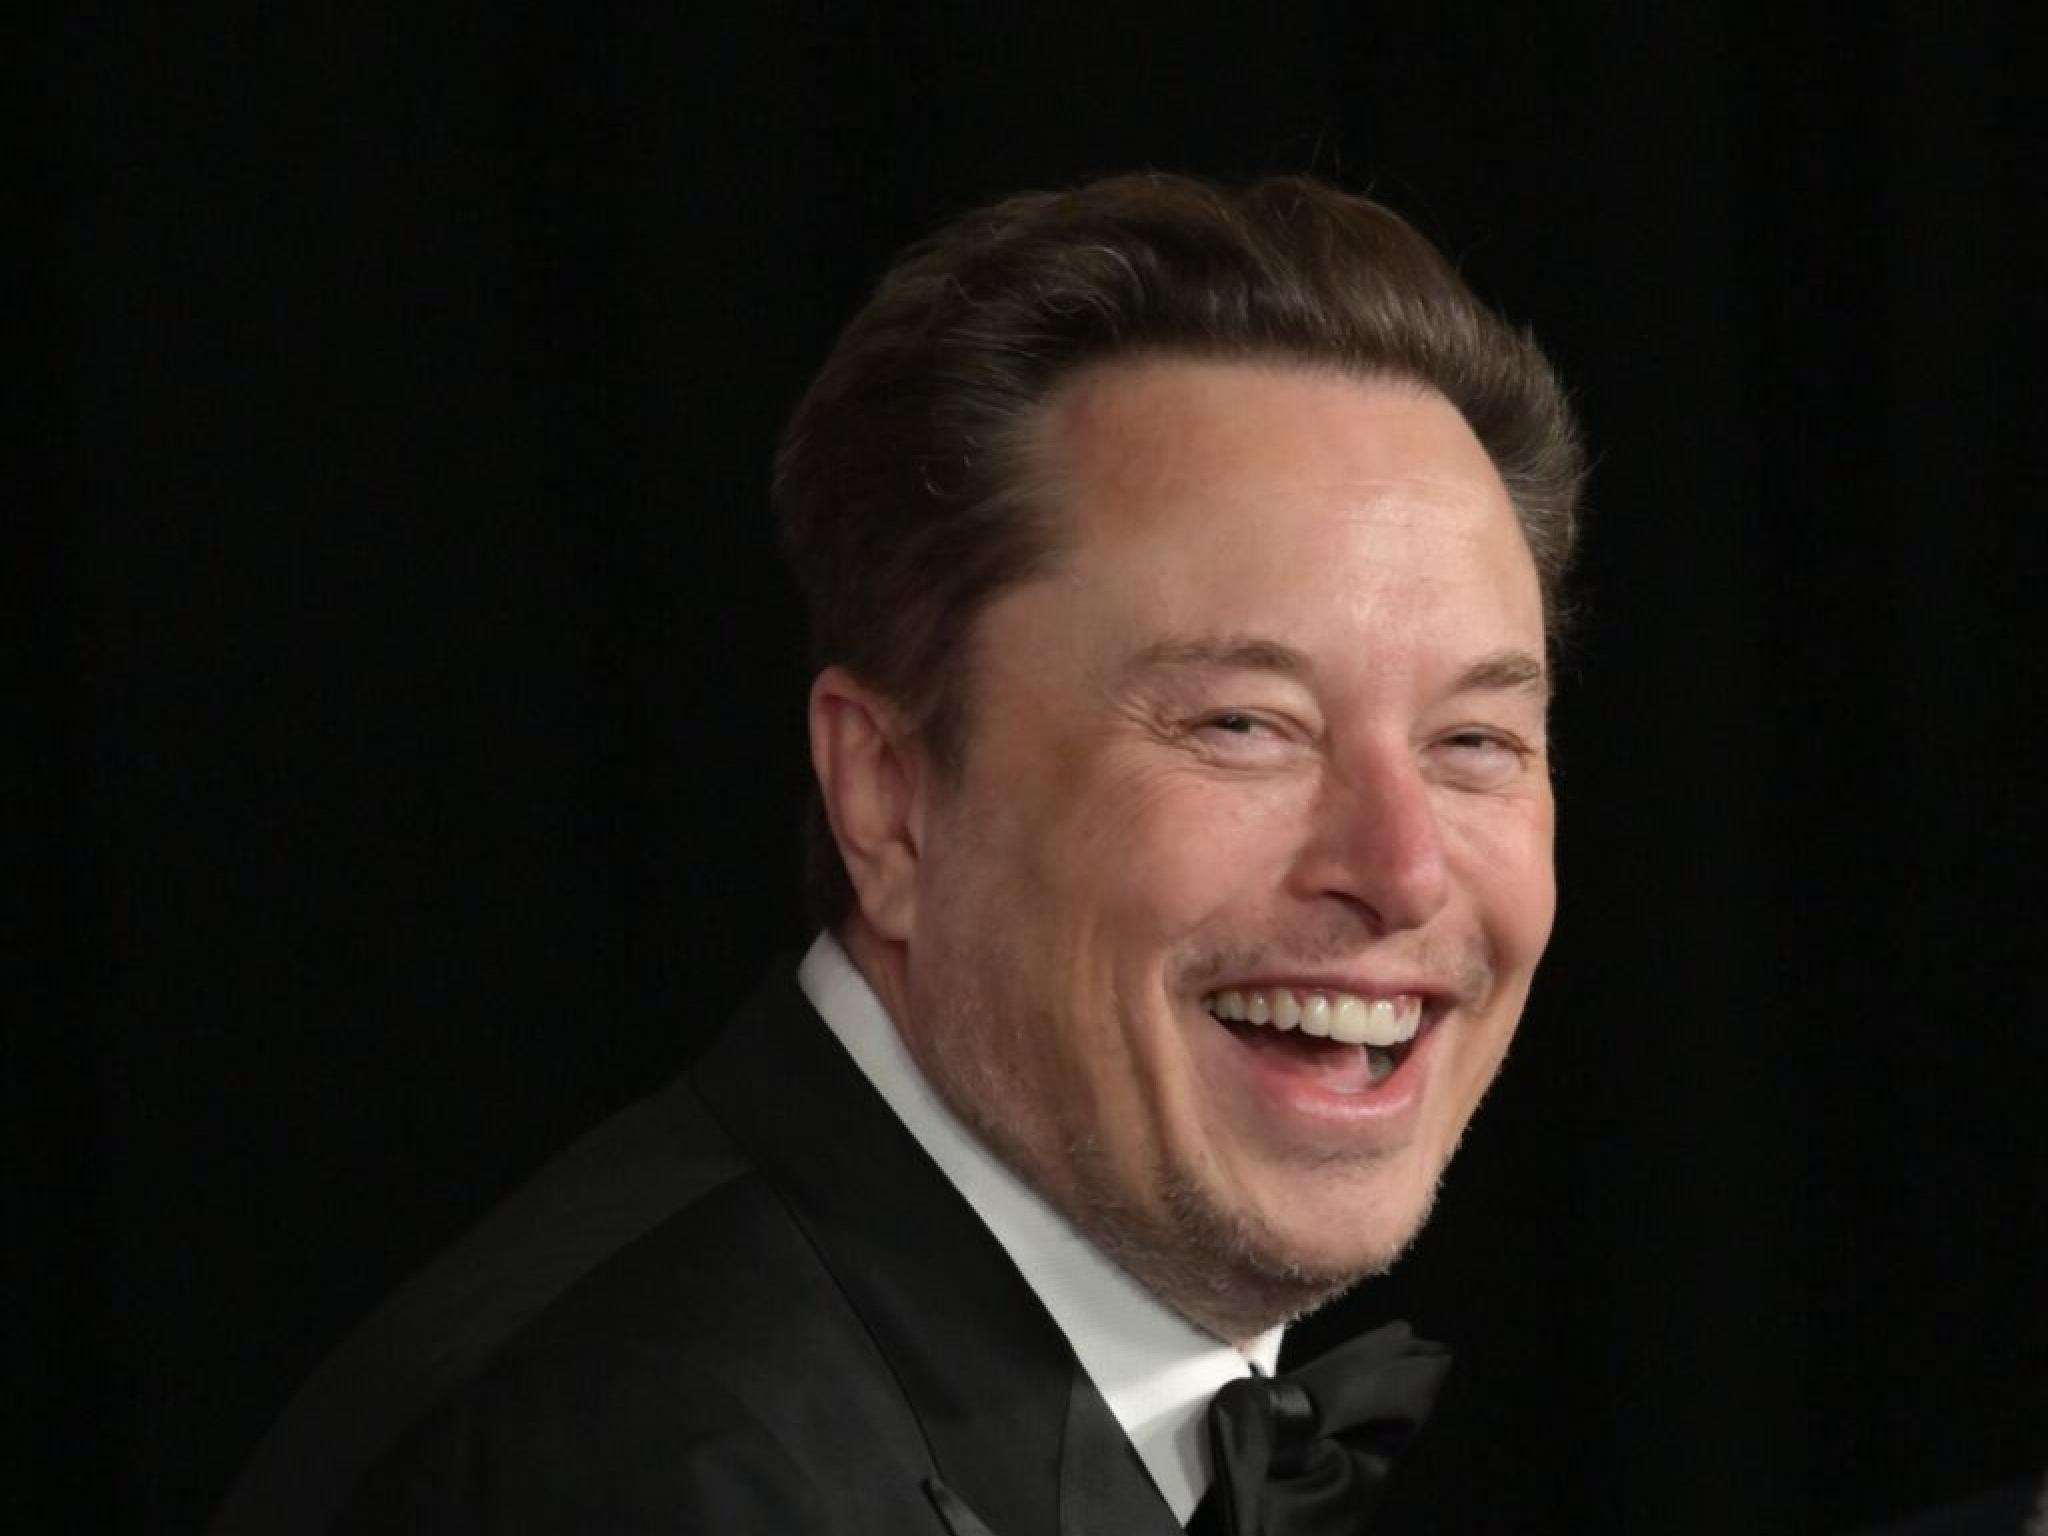  elon-musk-has-tears-of-laughter-as-tesla-investor-says-stock-is-up-one-gordon-johnson-after-bear-defying-surge 